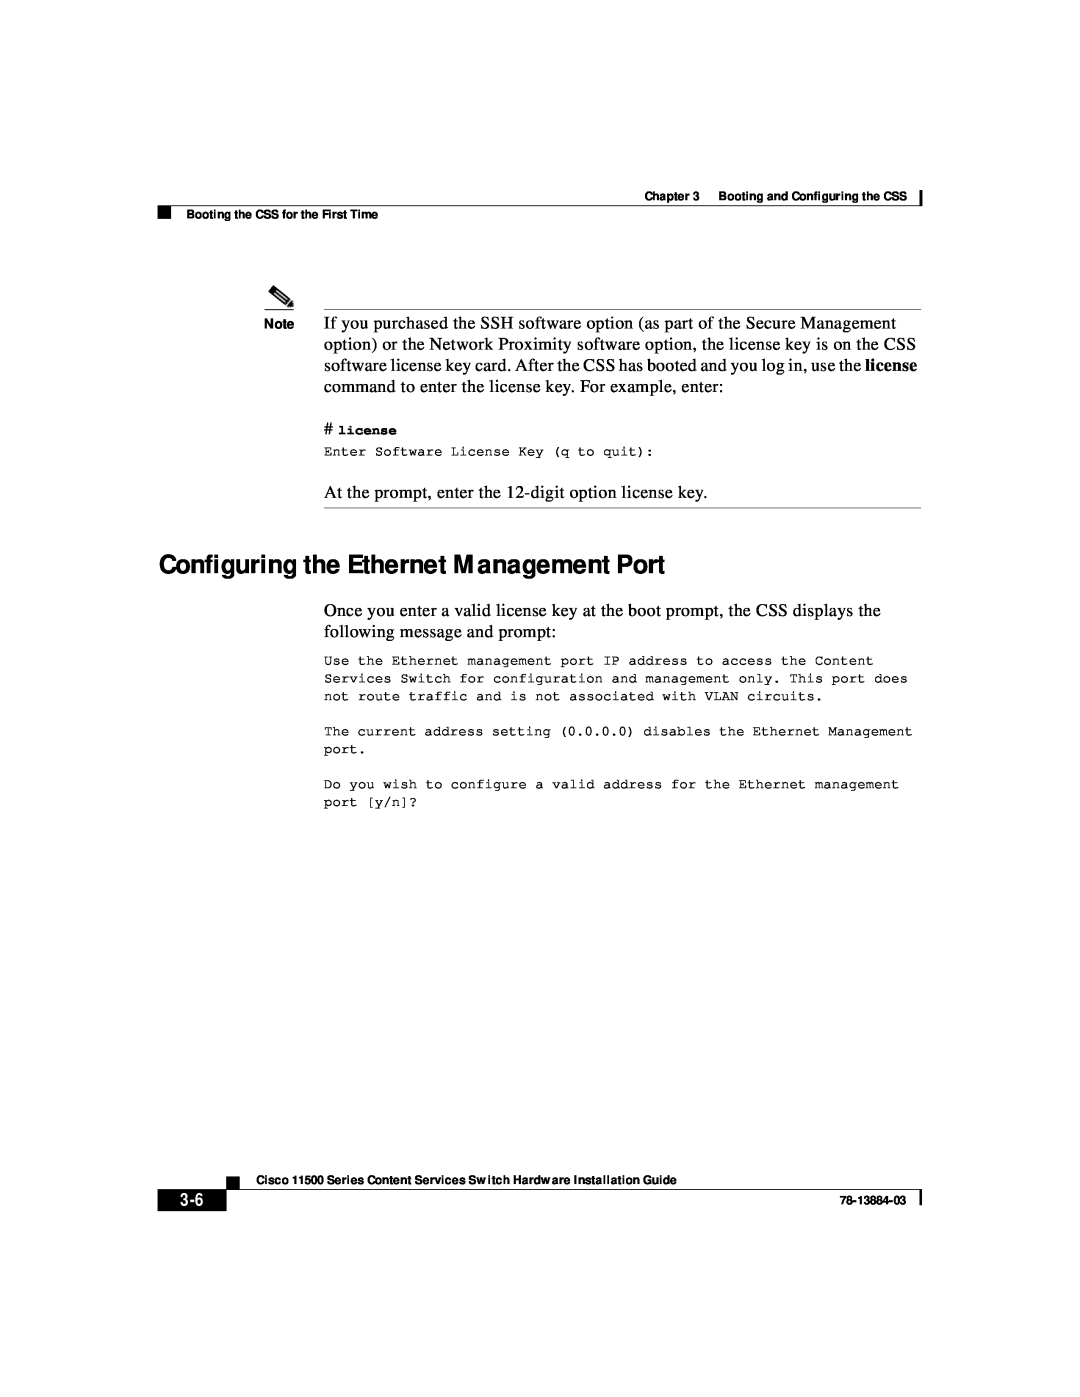 Cisco Systems 11500 Series manual Configuring the Ethernet Management Port 